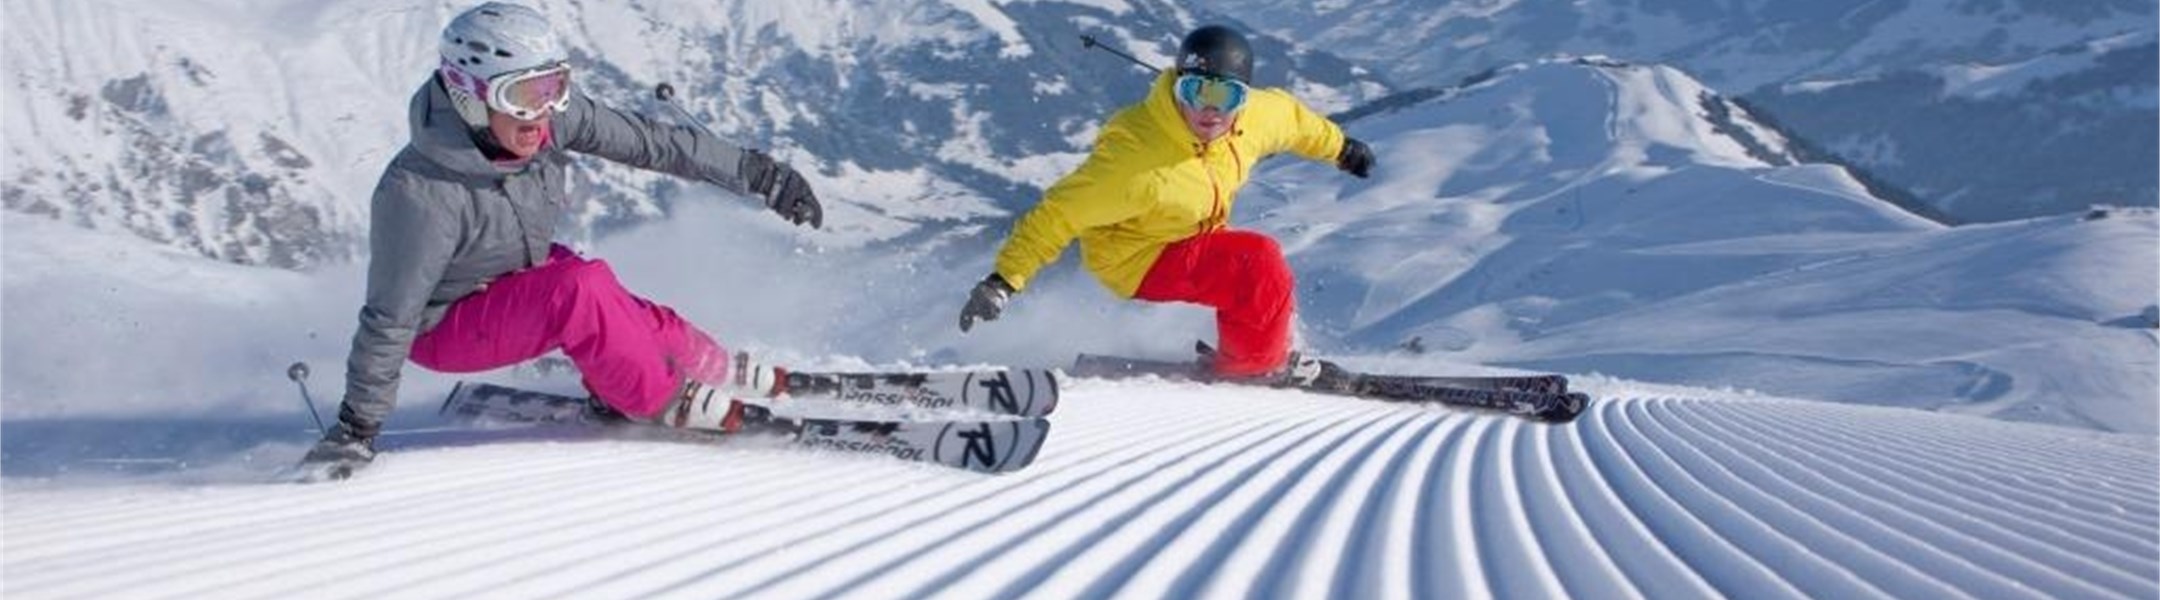 Carving-Fun in Adelboden